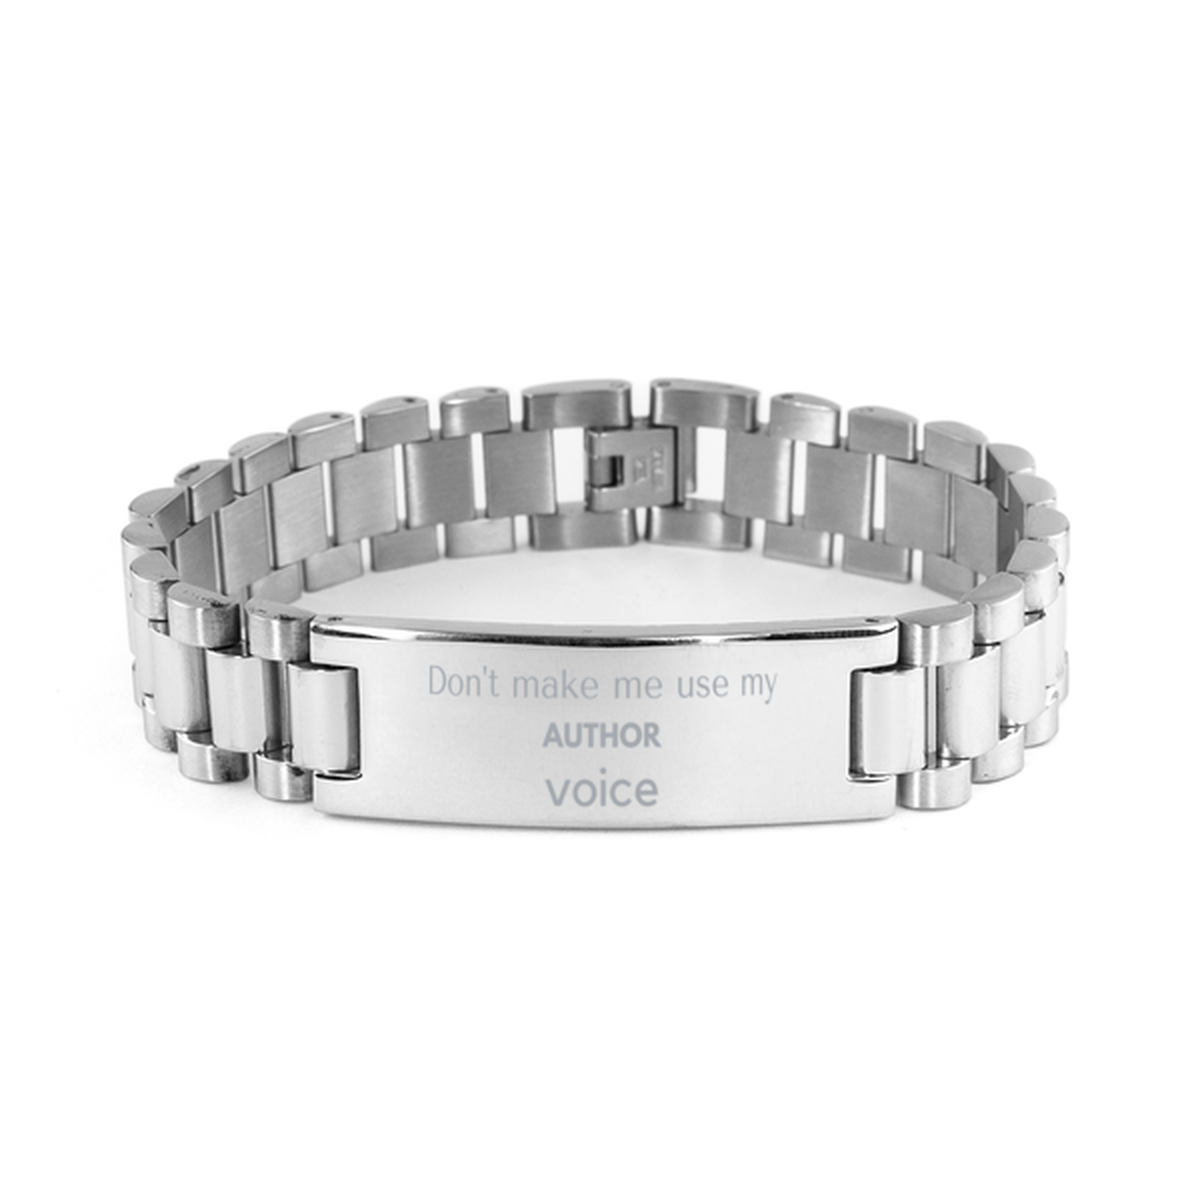 Don't make me use my Author voice, Sarcasm Author Gifts, Christmas Author Ladder Stainless Steel Bracelet Birthday Unique Gifts For Author Coworkers, Men, Women, Colleague, Friends